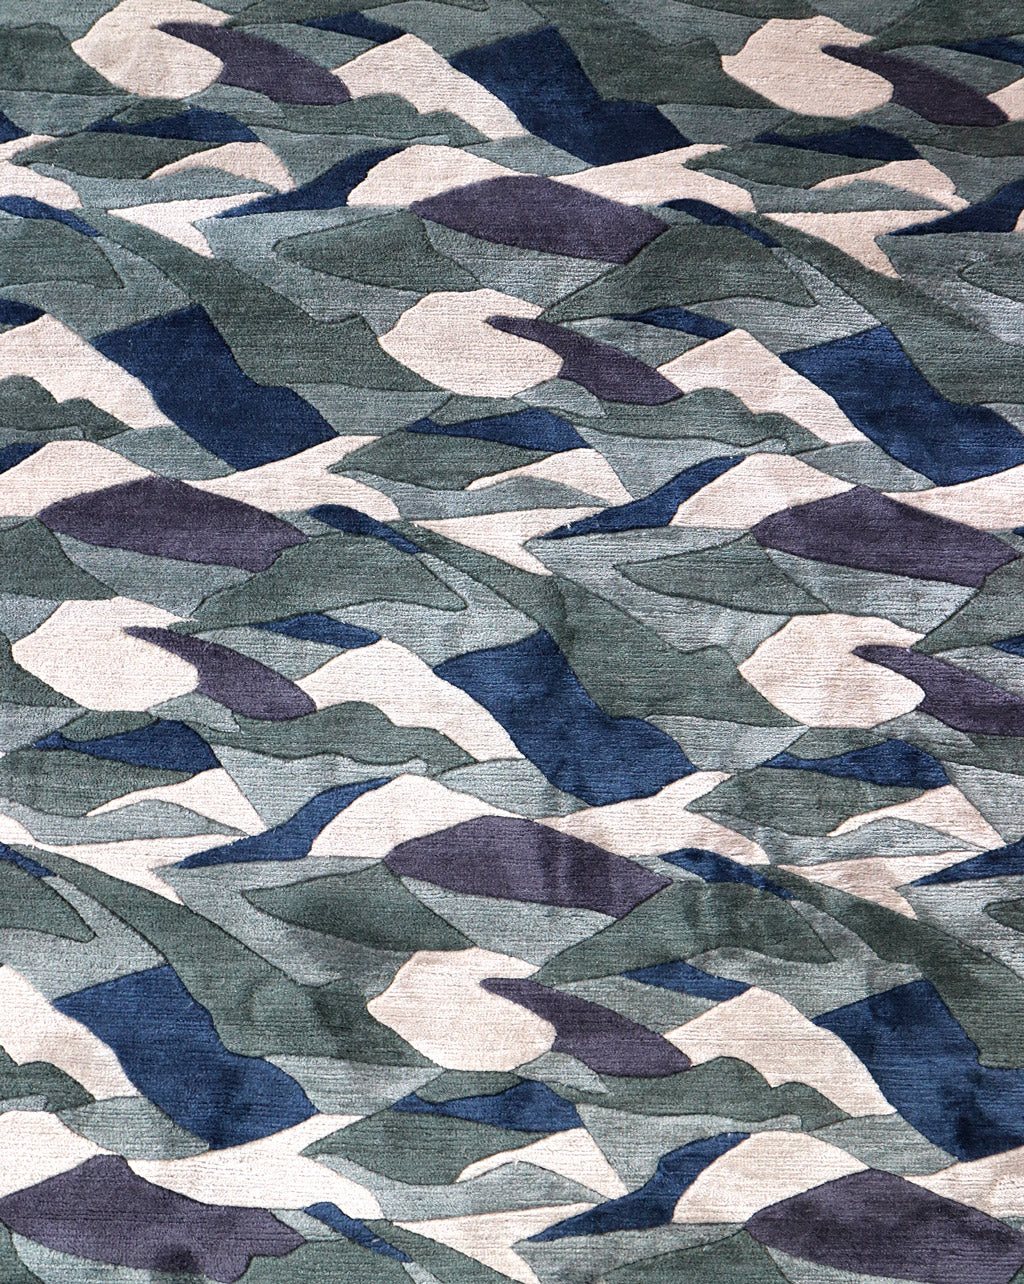 A green and blue fabric with a Mani Hand Knotted Rug||Water pattern in different colorways.